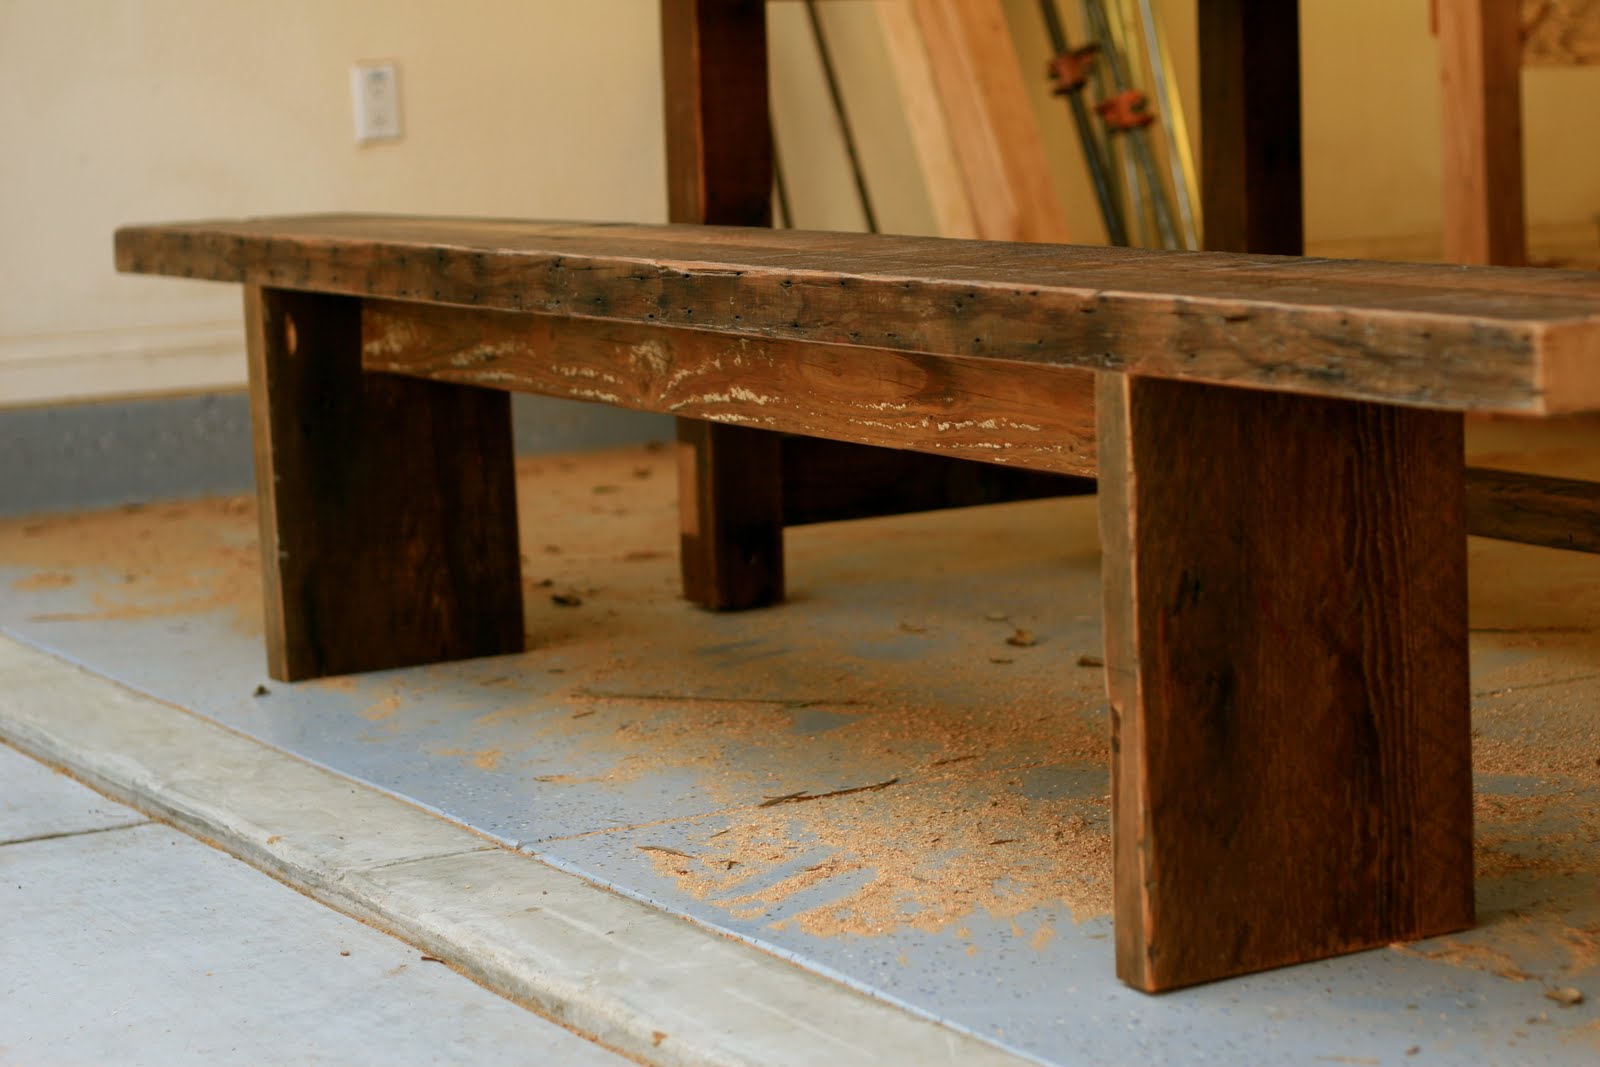 Arbor Exchange | Reclaimed Wood Furniture: Echo Park 8ft Table + Benches